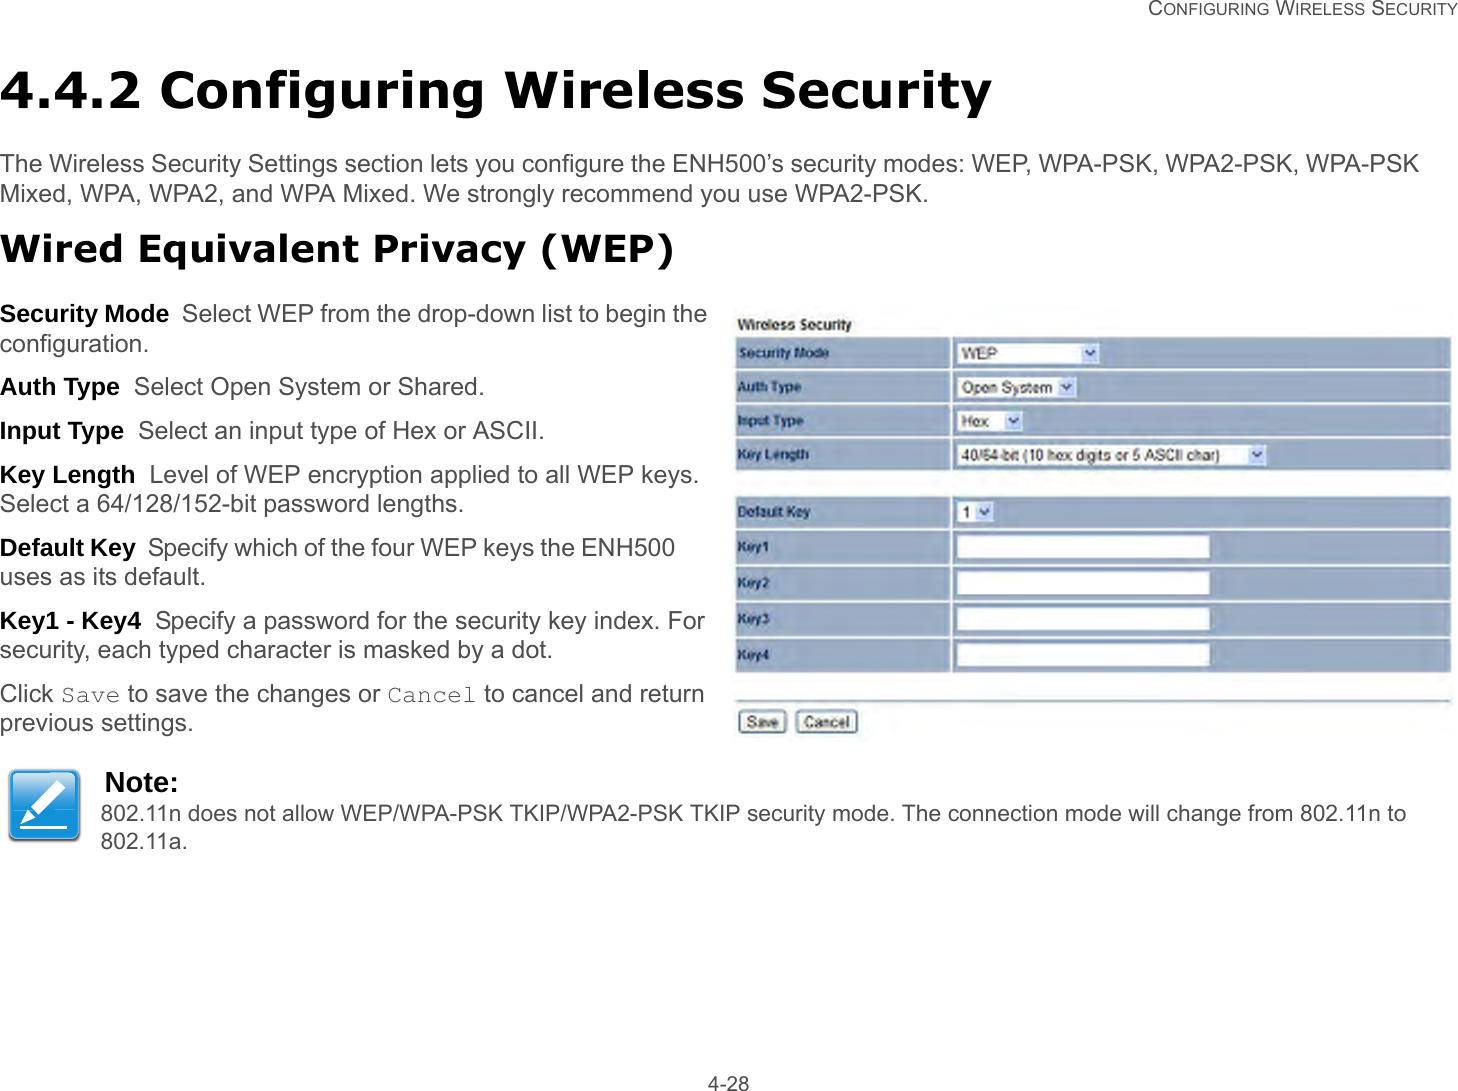   CONFIGURING WIRELESS SECURITY 4-284.4.2 Configuring Wireless SecurityThe Wireless Security Settings section lets you configure the ENH500’s security modes: WEP, WPA-PSK, WPA2-PSK, WPA-PSK Mixed, WPA, WPA2, and WPA Mixed. We strongly recommend you use WPA2-PSK.Wired Equivalent Privacy (WEP)Security Mode  Select WEP from the drop-down list to begin the configuration.Auth Type  Select Open System or Shared.Input Type  Select an input type of Hex or ASCII.Key Length  Level of WEP encryption applied to all WEP keys. Select a 64/128/152-bit password lengths.Default Key  Specify which of the four WEP keys the ENH500 uses as its default.Key1 - Key4  Specify a password for the security key index. For security, each typed character is masked by a dot.Click Save to save the changes or Cancel to cancel and return previous settings.Note:802.11n does not allow WEP/WPA-PSK TKIP/WPA2-PSK TKIP security mode. The connection mode will change from 802.11n to 802.11a.